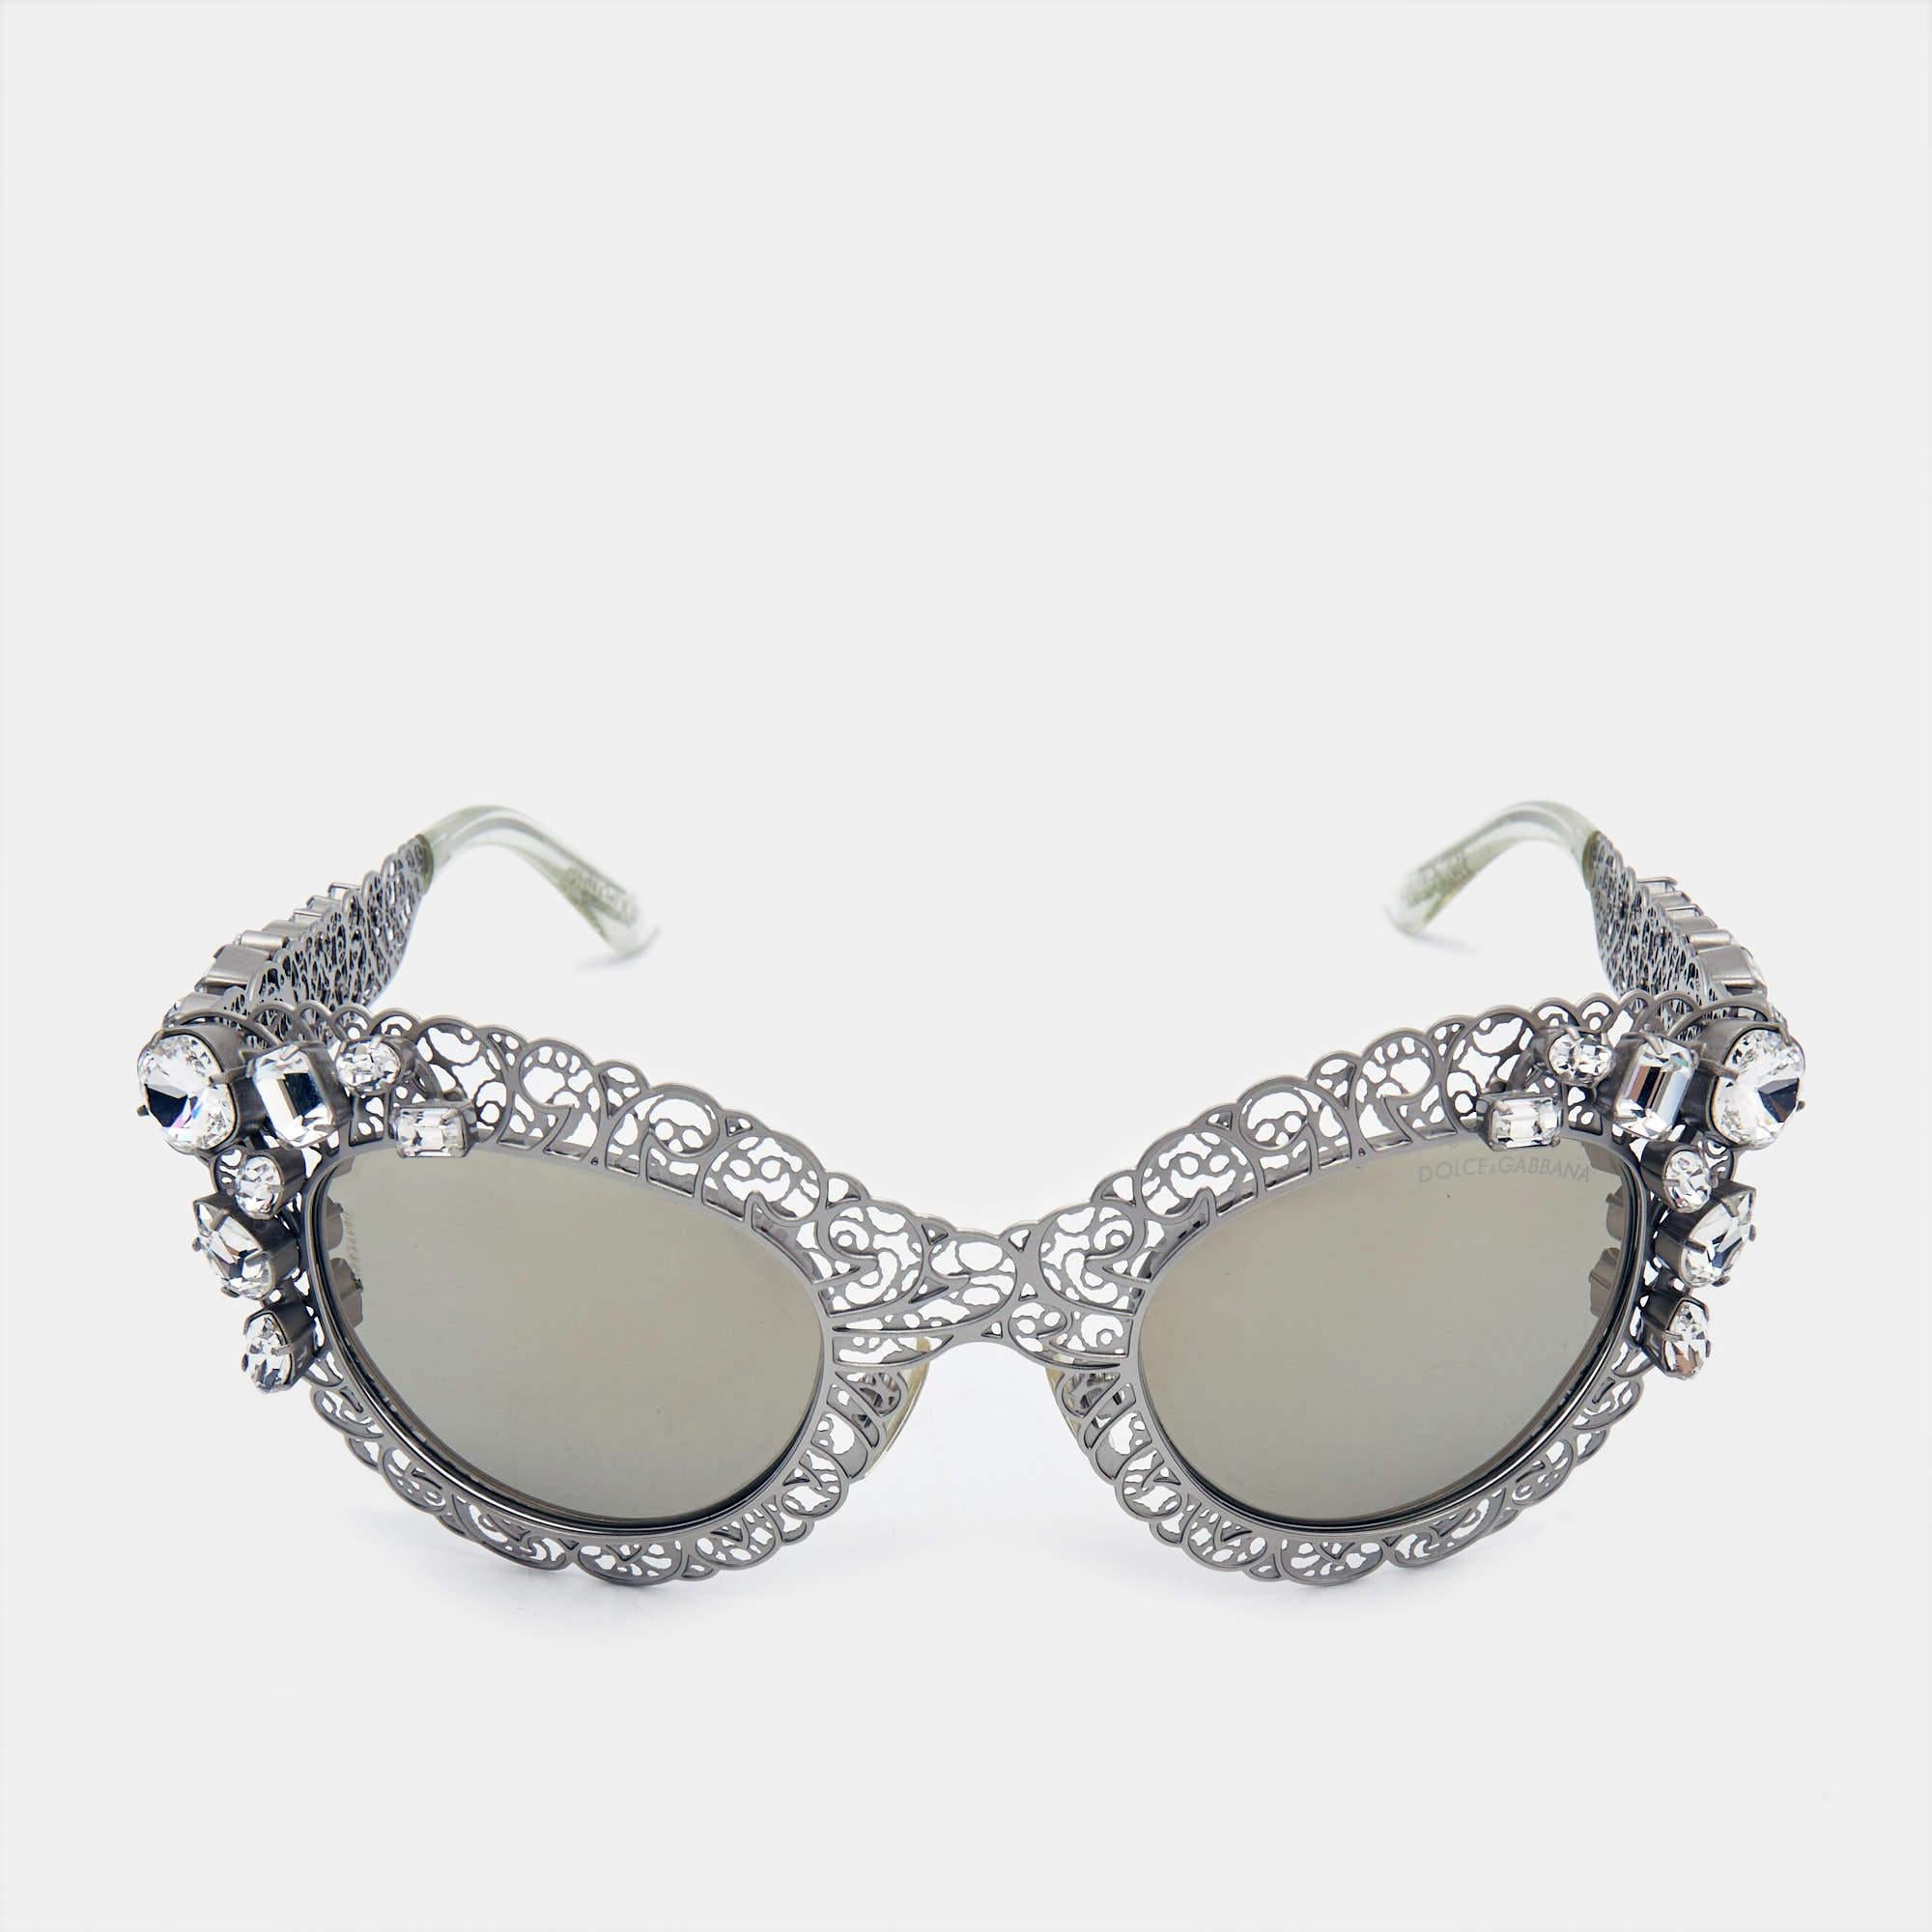 This pair of feminine cat eye sunglasses from Dolce & Gabbana has been crafted from acetate. It features an intricate filigree detailing and decorated with striking embellishments for an elevated look.

Includes
Original Case, Original Pouch, Brand